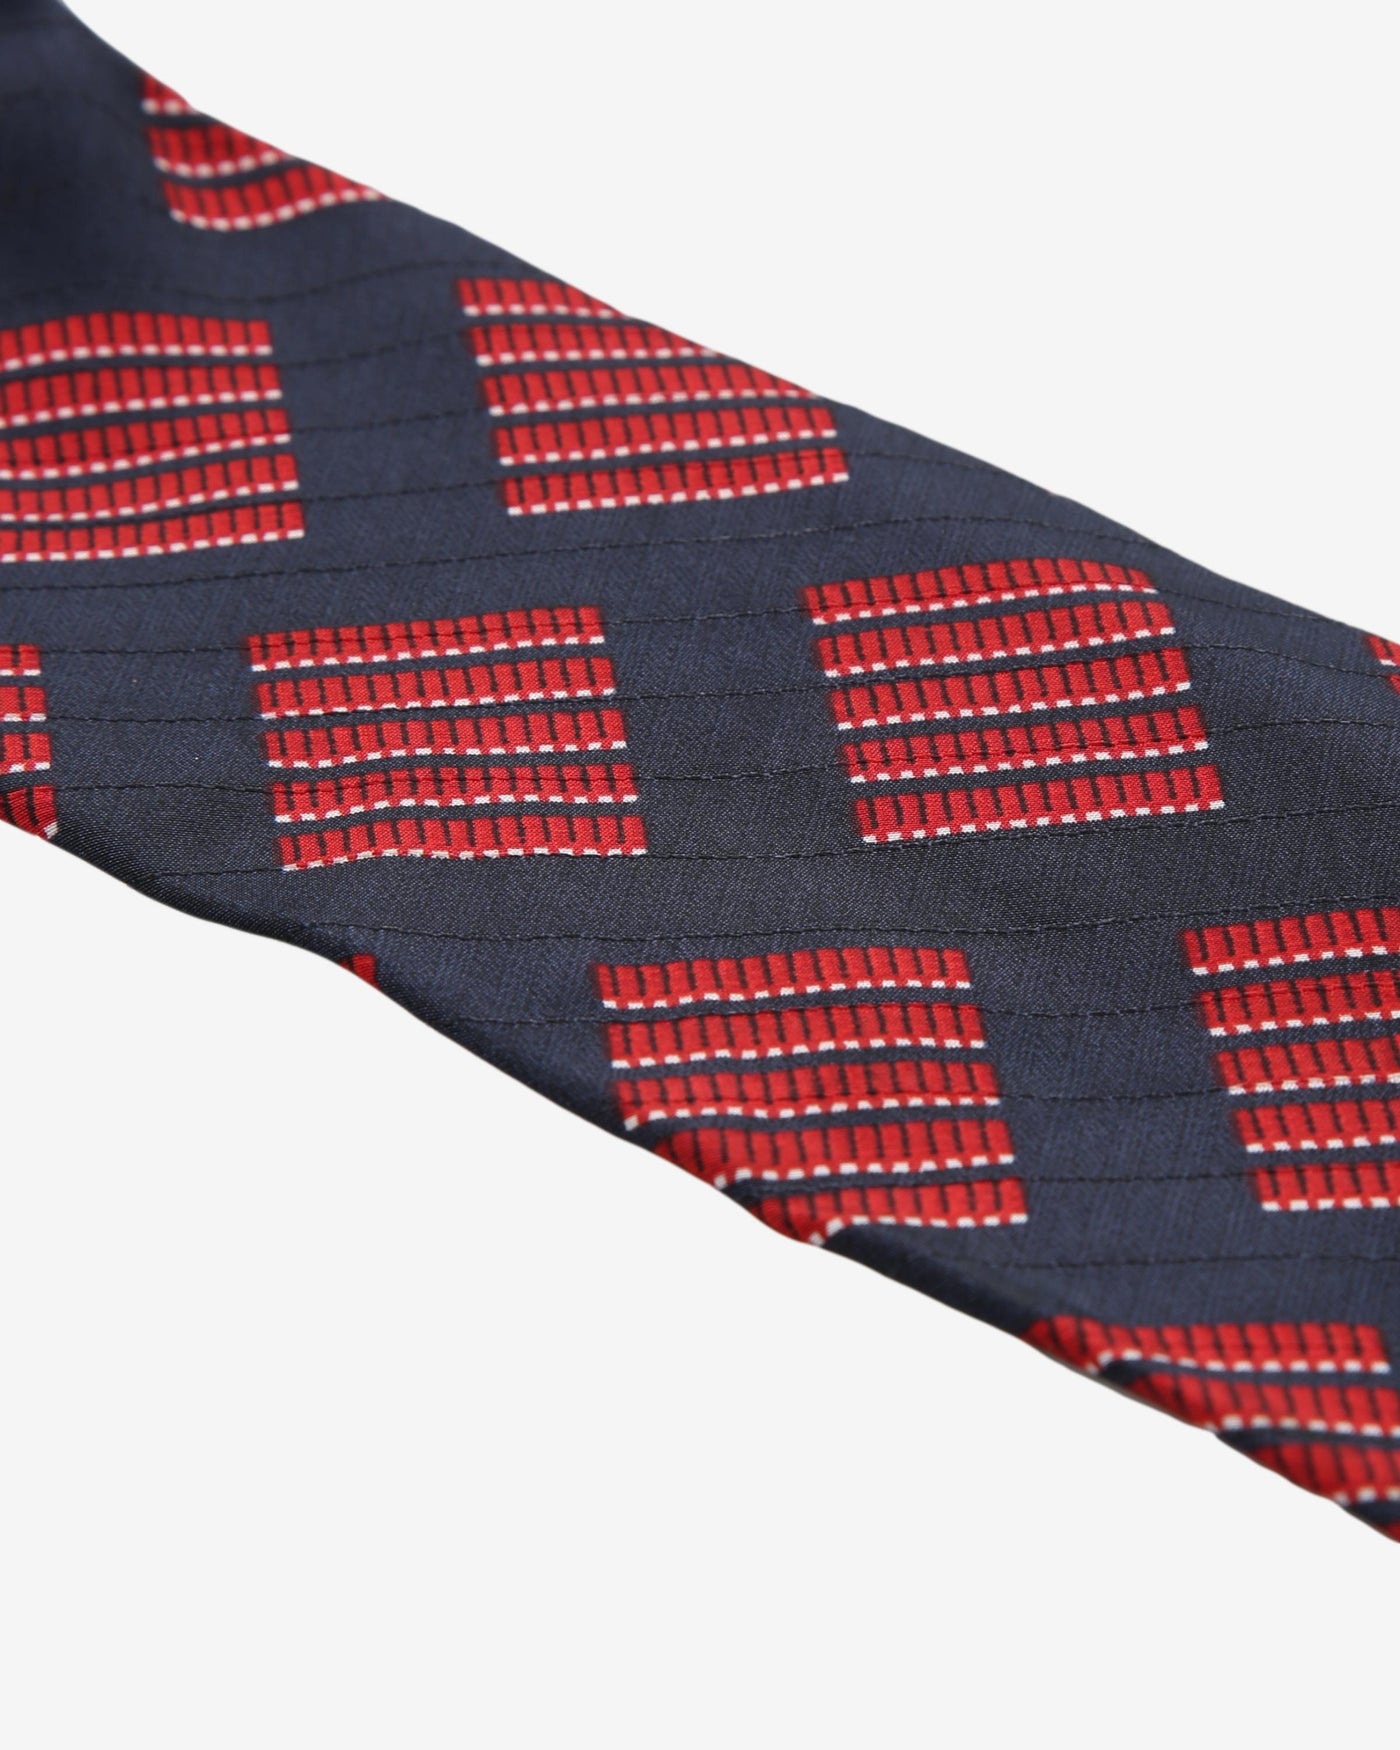 Emporio Armani Red / Navy Patterned Tie